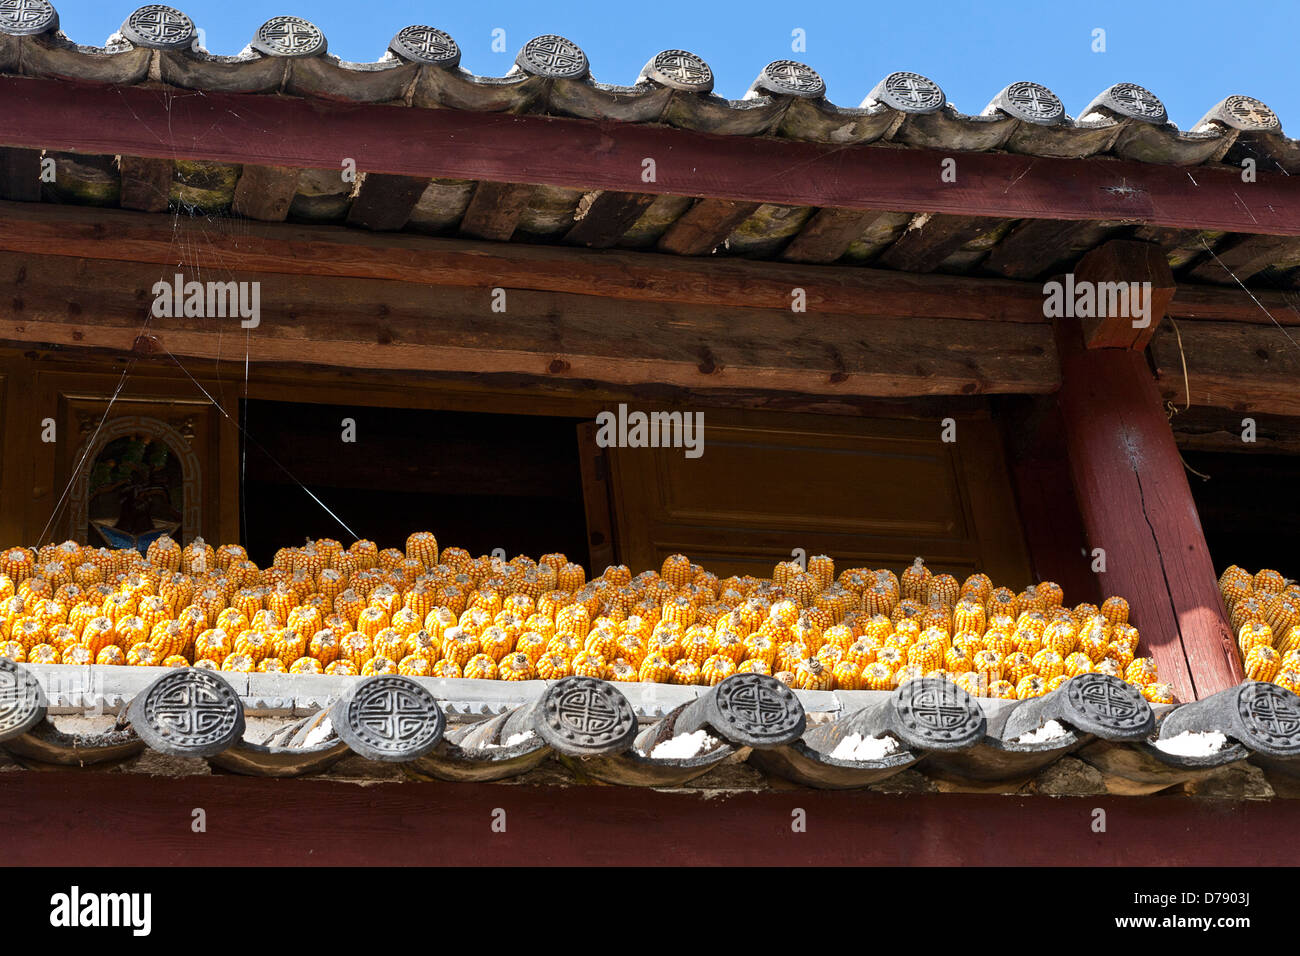 China, Yunnan Province, Lijiang, Yuhu Village, Corn cobs drying in the sun, beneath the roof of a farm building. Stock Photo